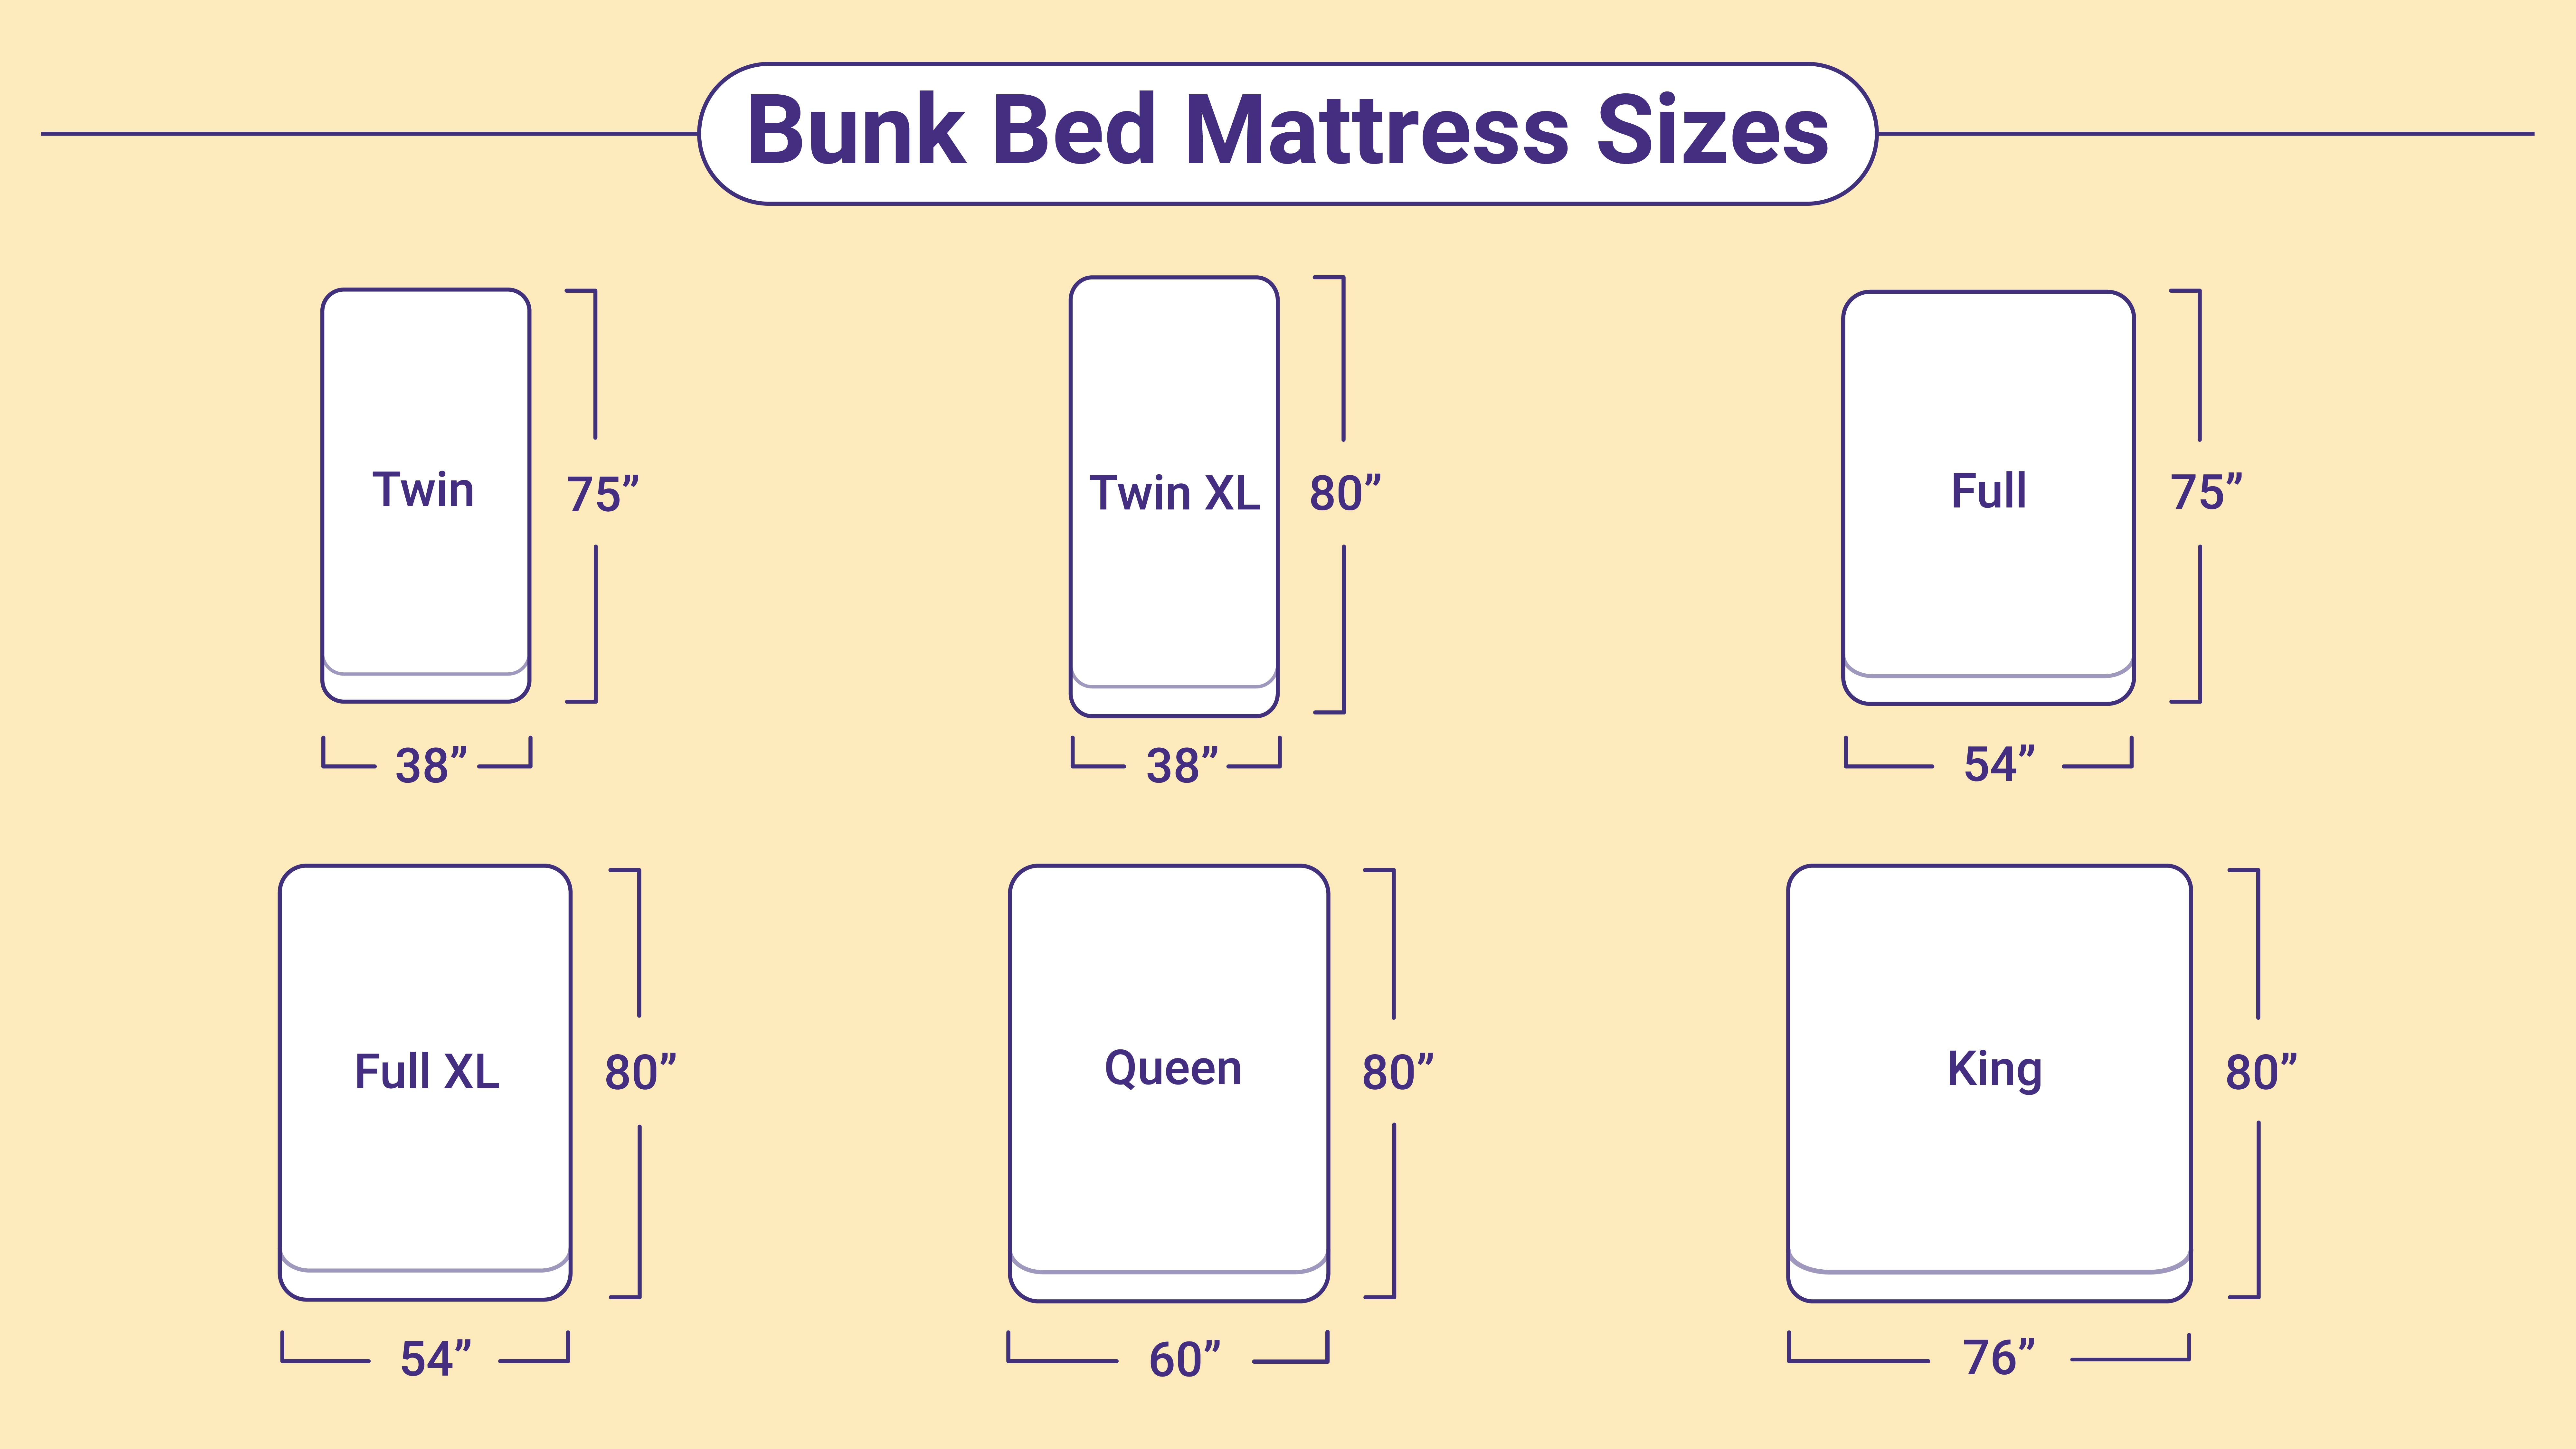 Bunk Bed Mattress Sizes And Dimensions, Twin Bunk Bed Dimensions